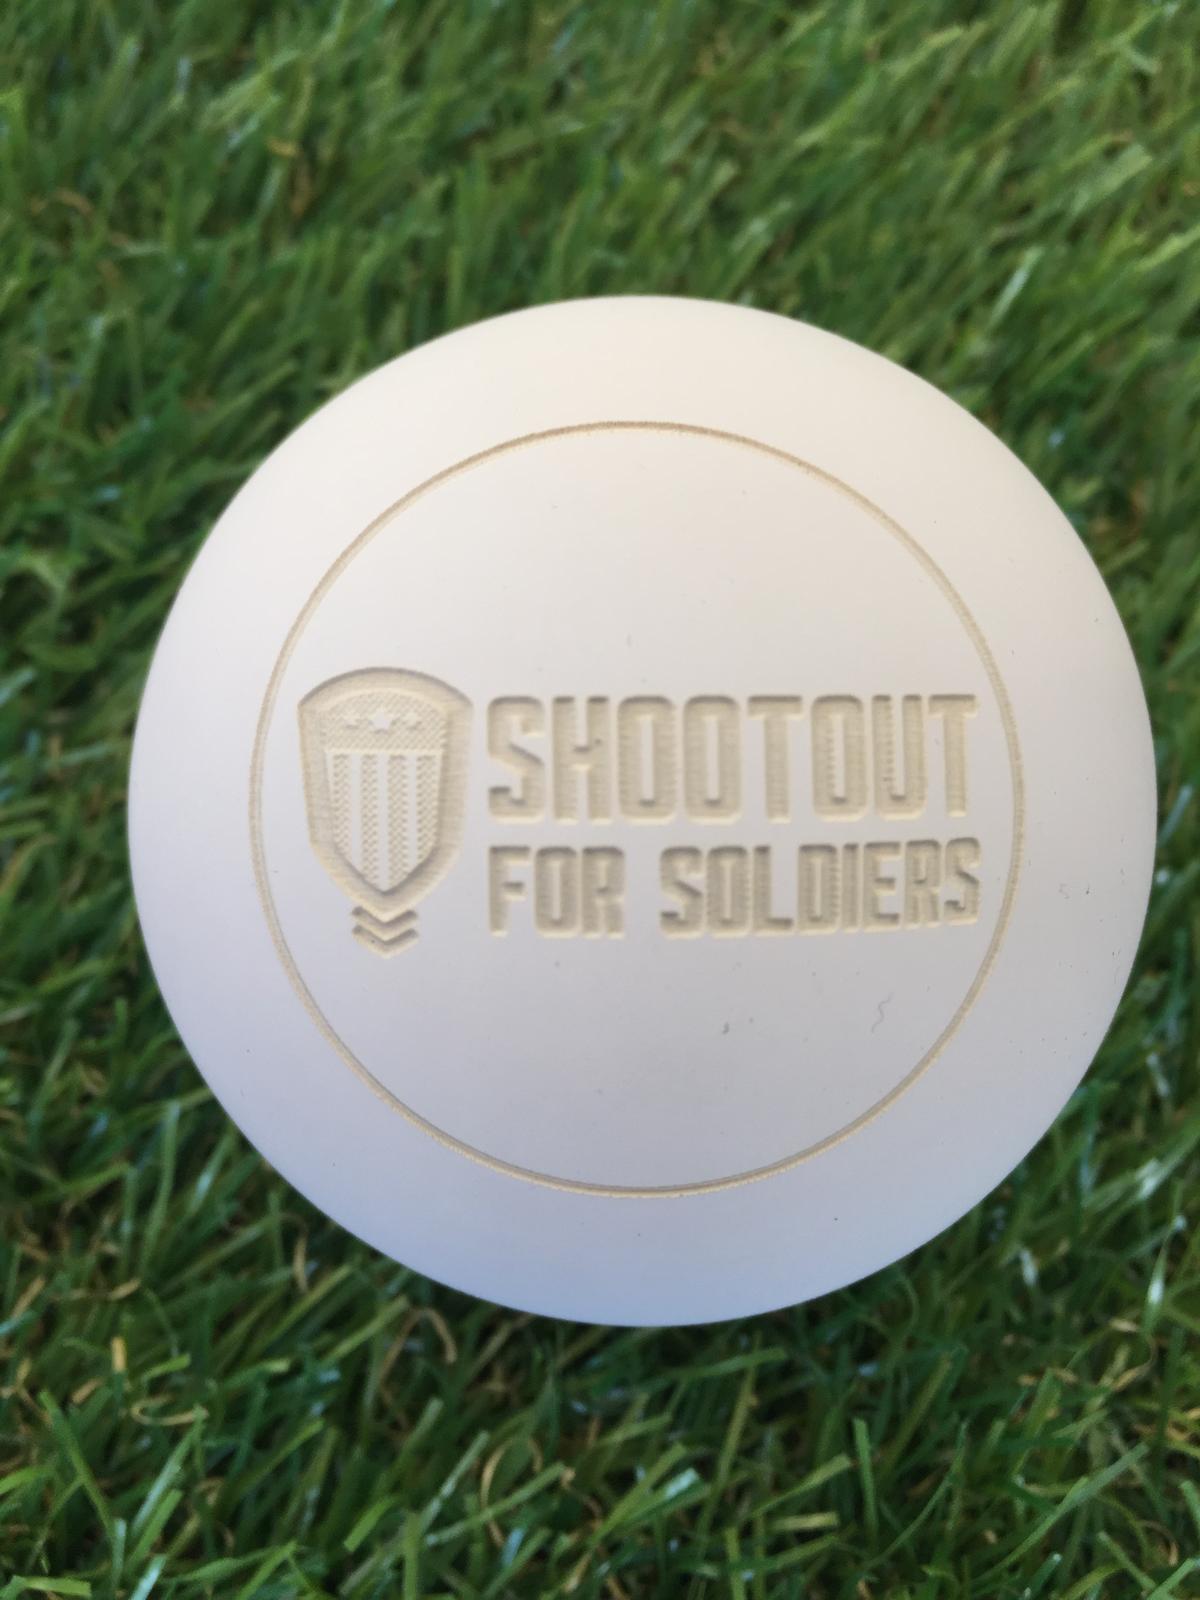 Shootout For Soldiers Partners with Signature Lacrosse